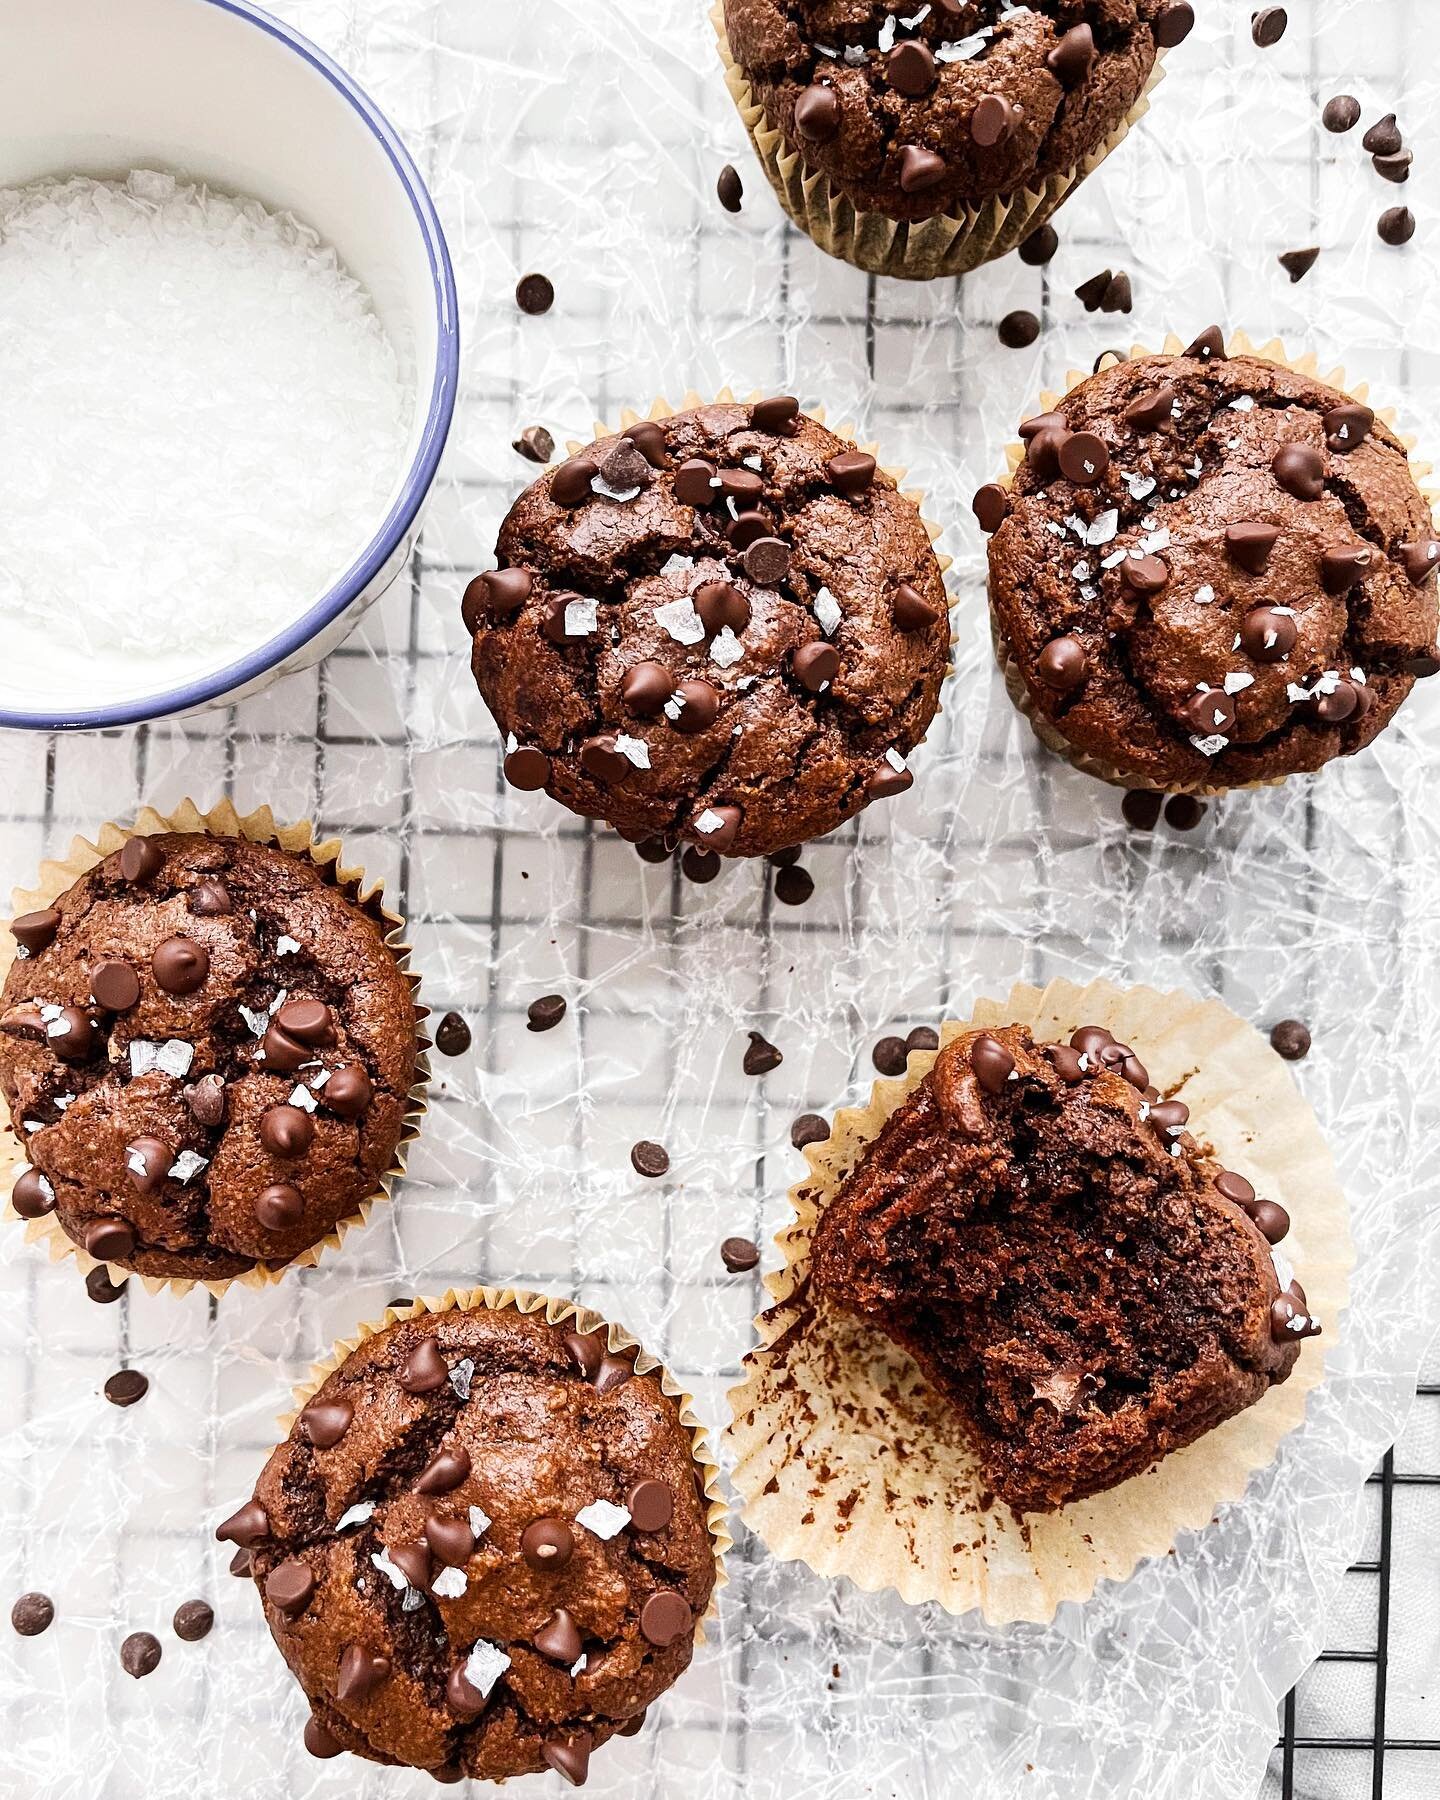 I have a few days off while I wait to get tested after Aaron&rsquo;s bday road trip, so I&rsquo;m FOR SURE going to make these yummy treats! The recipe for these ✨Triple Chocolate Muffins✨ is dairy free, gluten free, egg free, and only made with natu